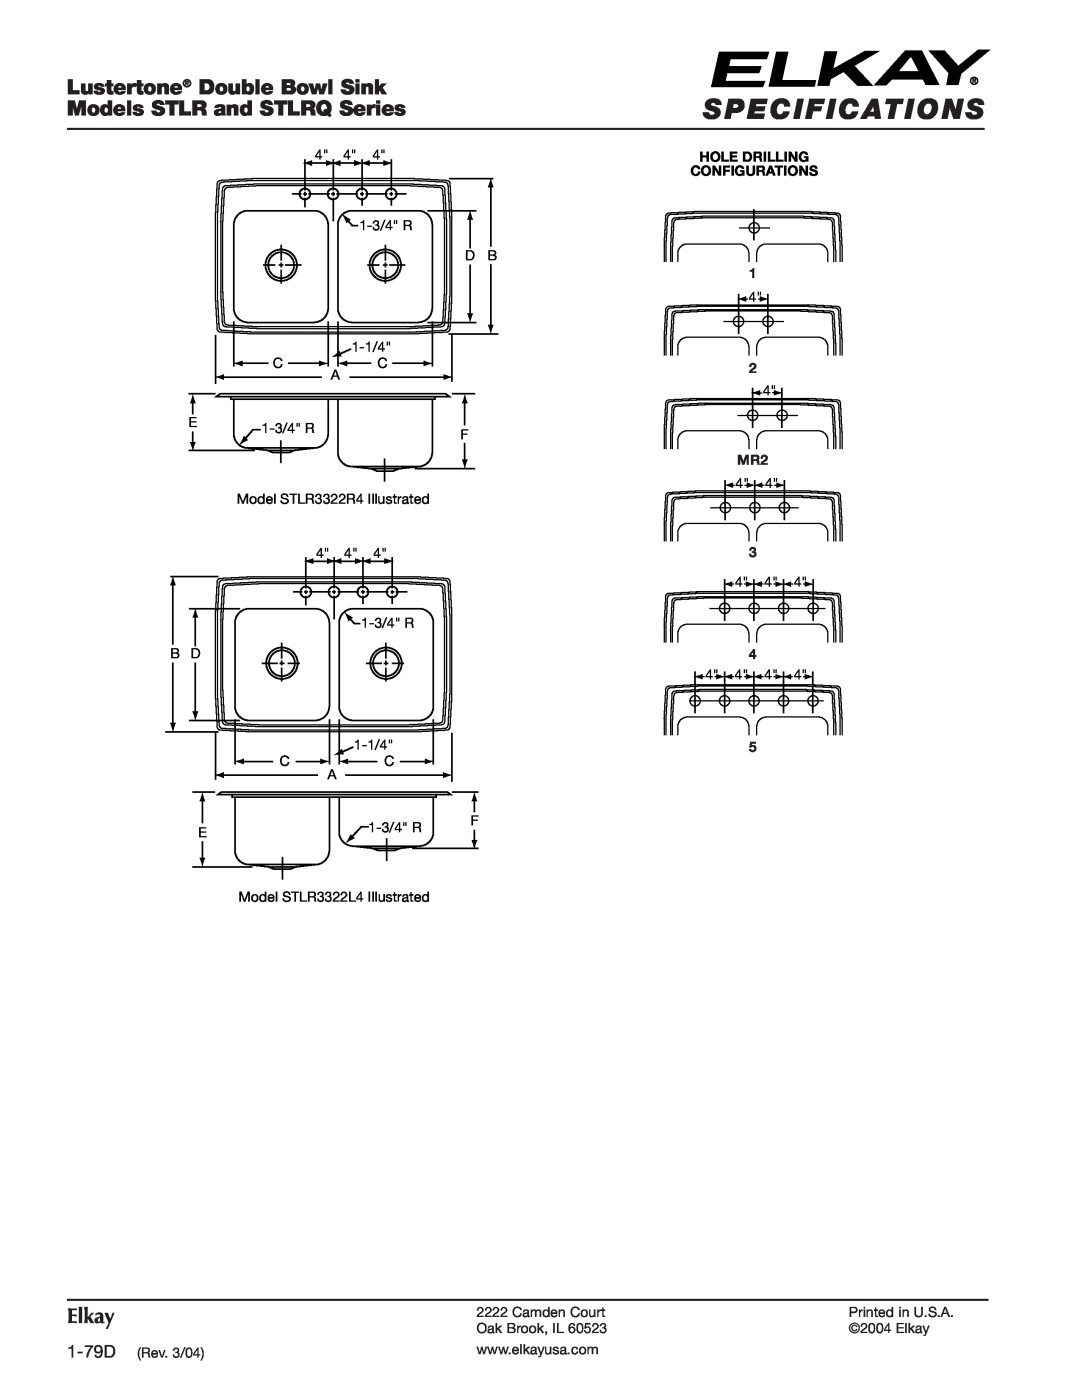 Elkay Specifications, Lustertone Double Bowl Sink, Models STLR and STLRQ Series, Elkay, Hole Drilling Configurations 